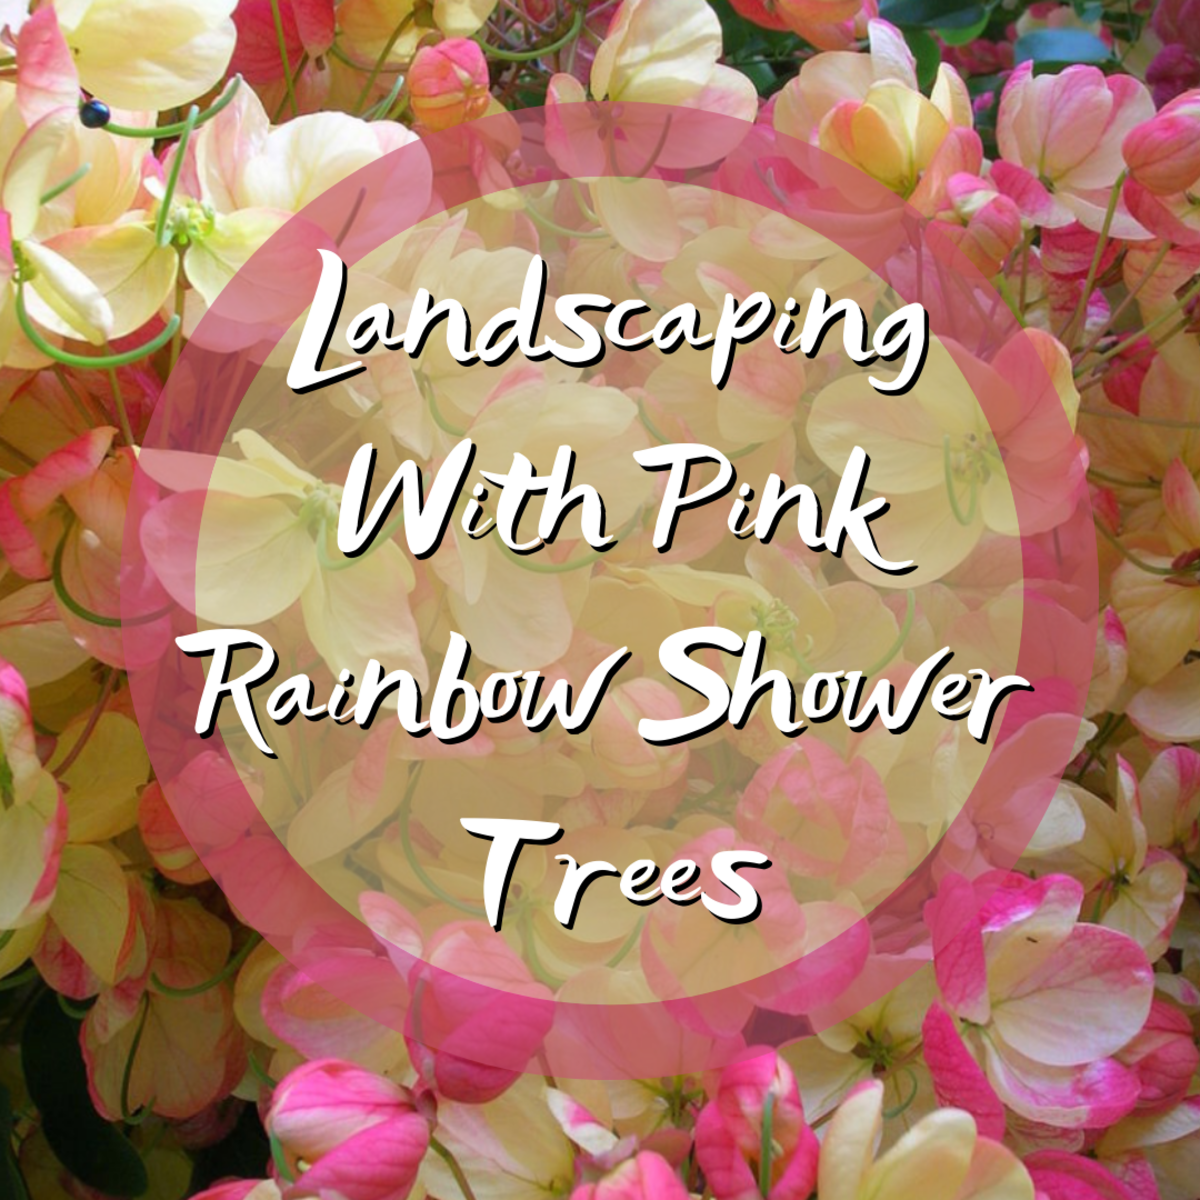 Landscaping With Pink Rainbow Shower Trees (Cassia)